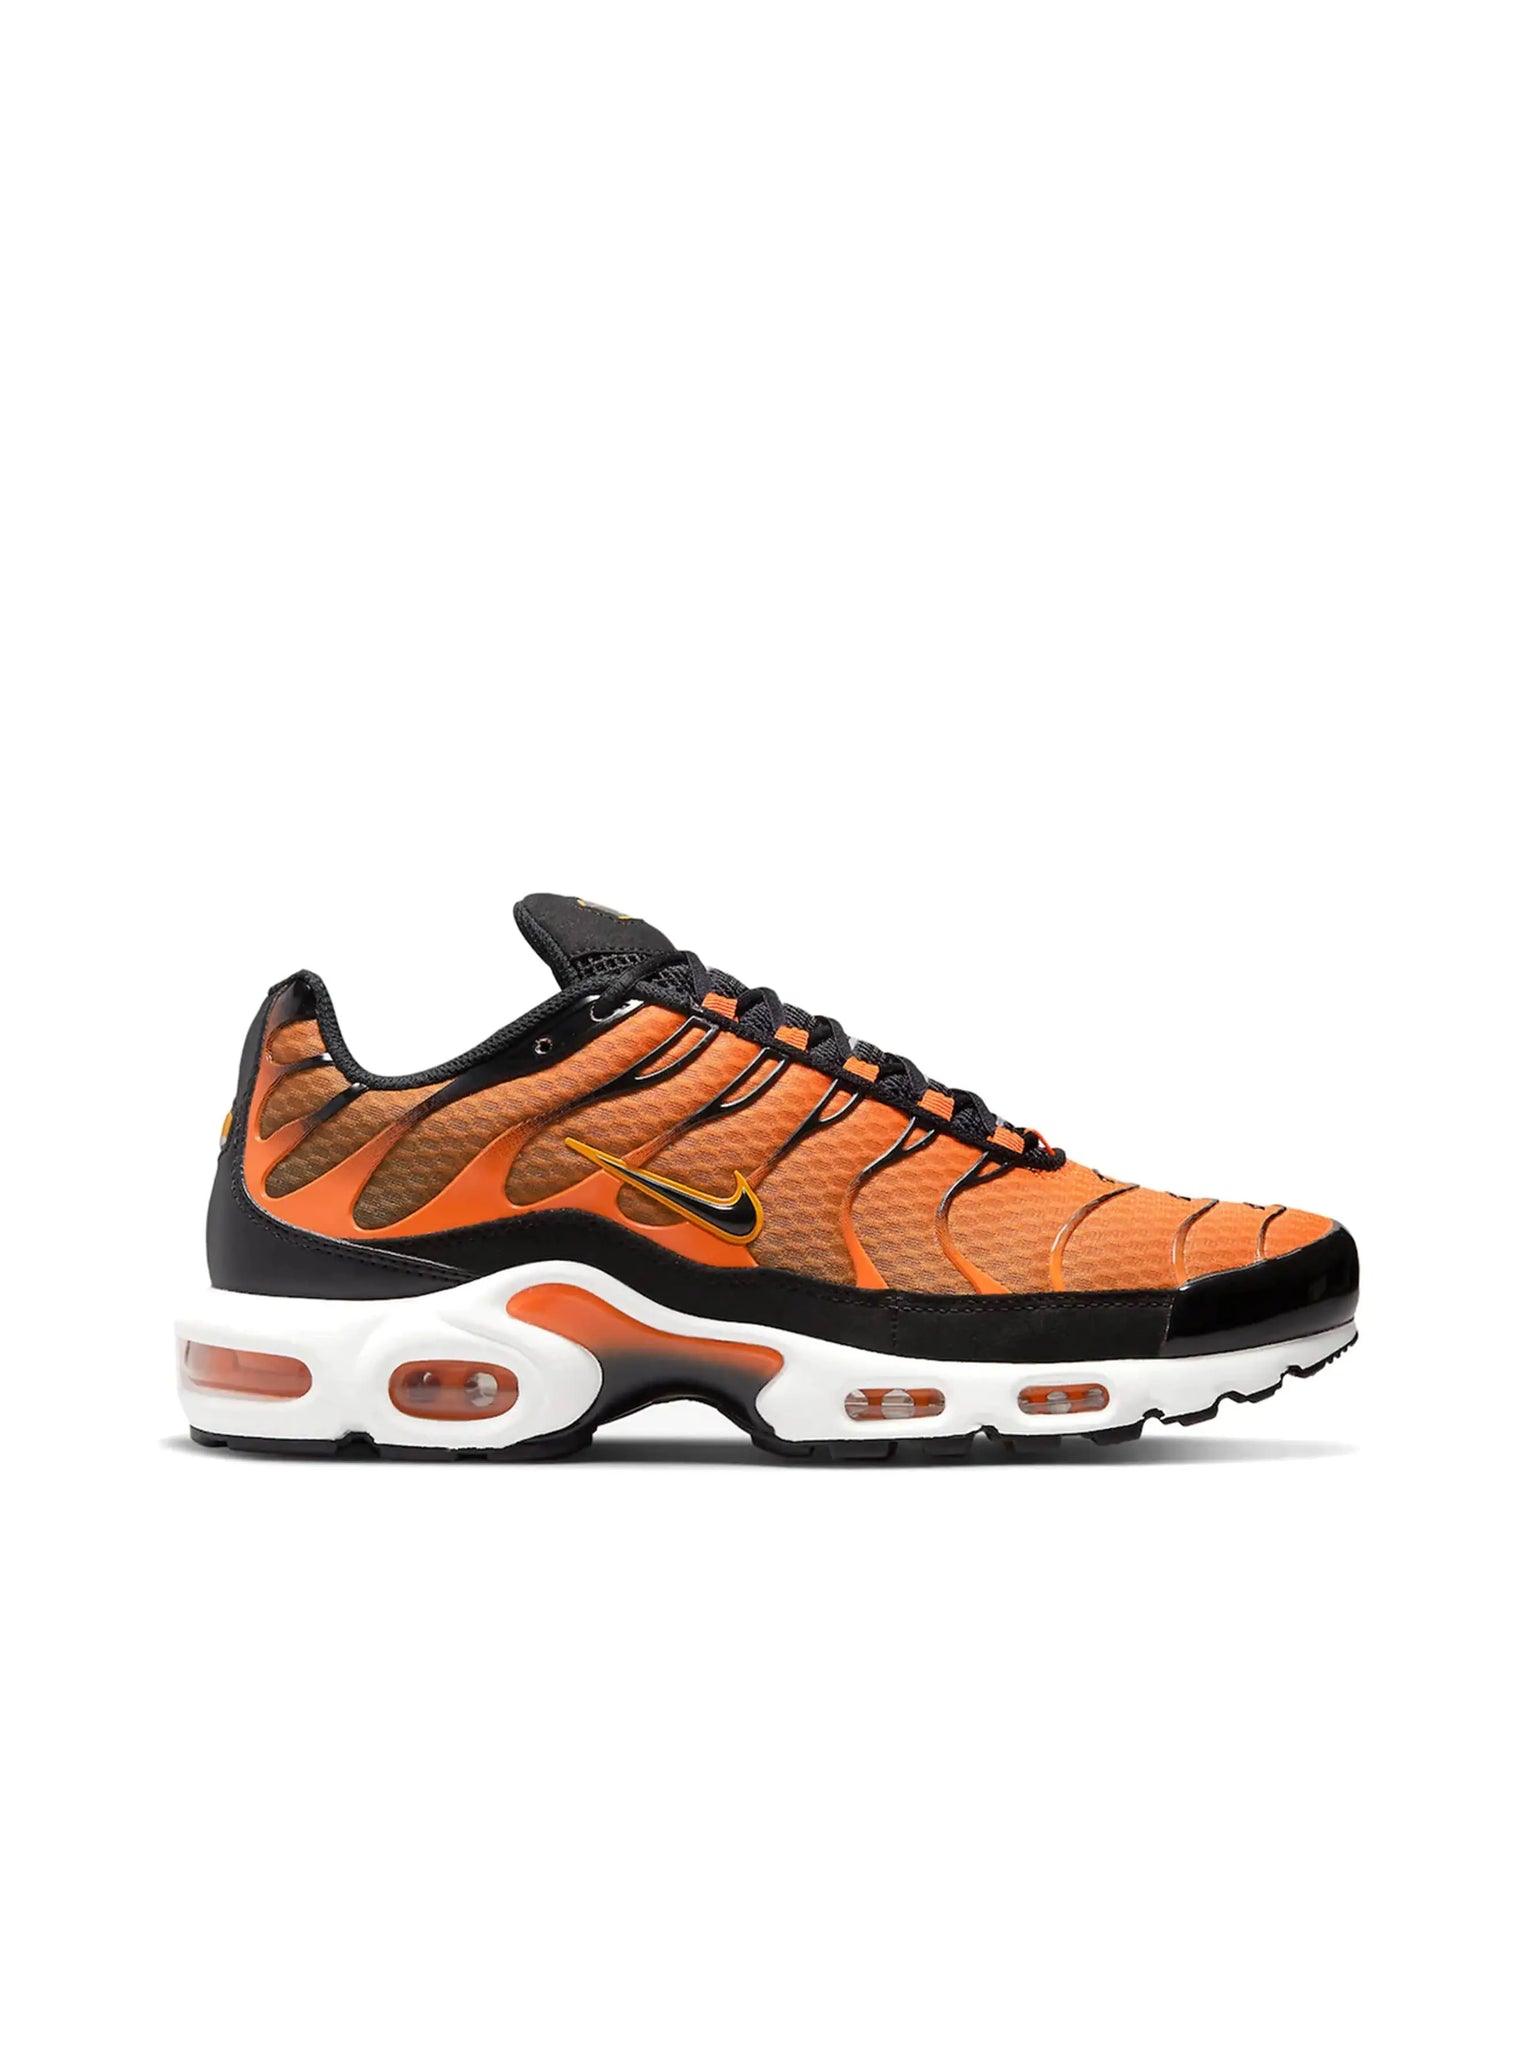 Nike Air Max Plus Safety Orange Black in Auckland, New Zealand - Shop name